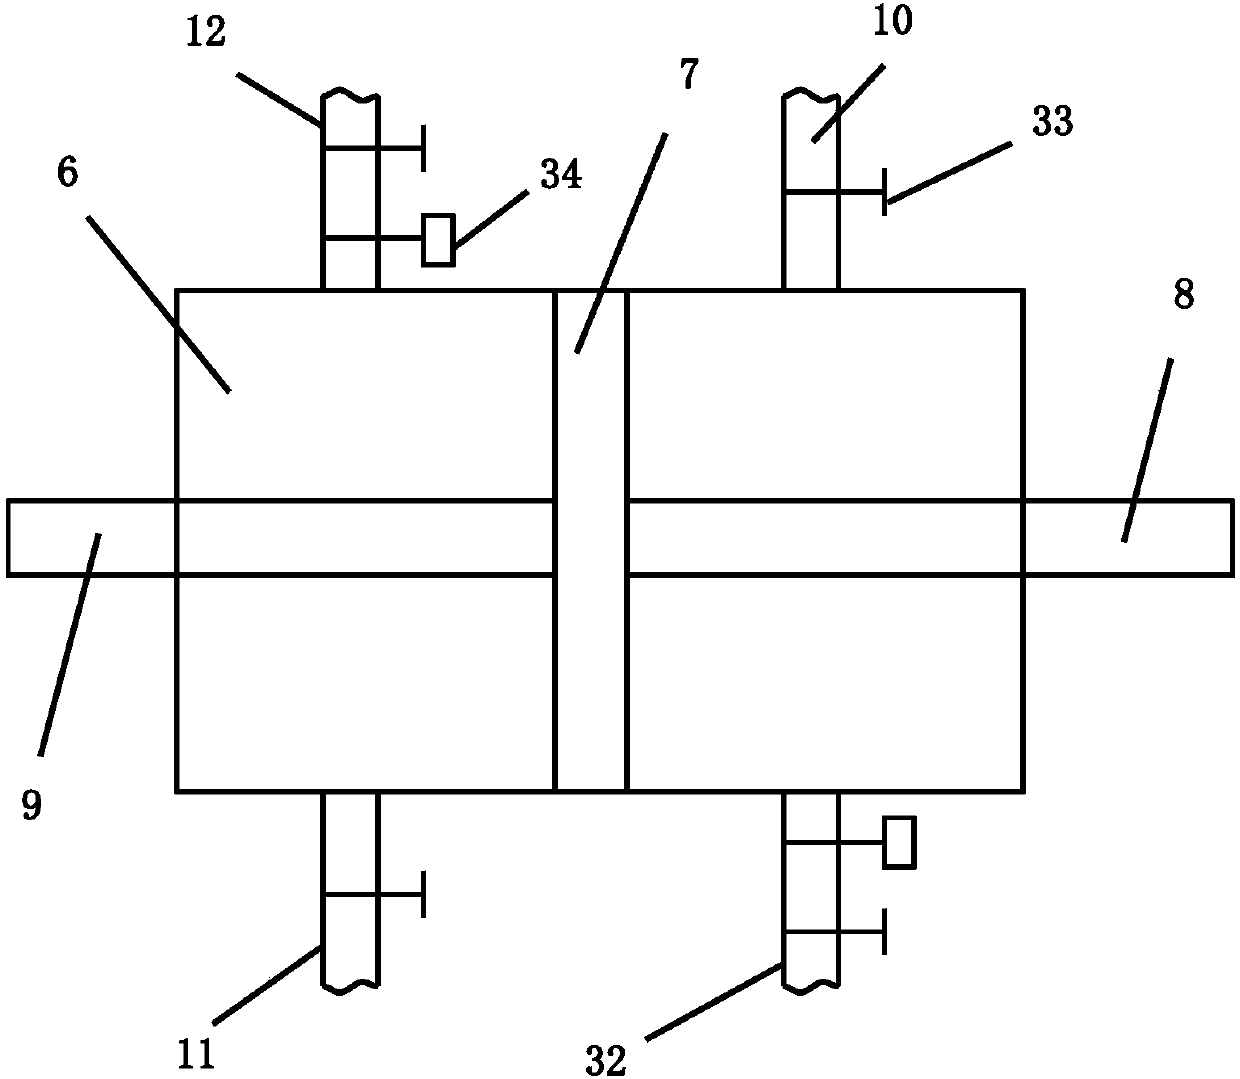 Lower-hanging-type truss structure based on quadrilateral mechanism